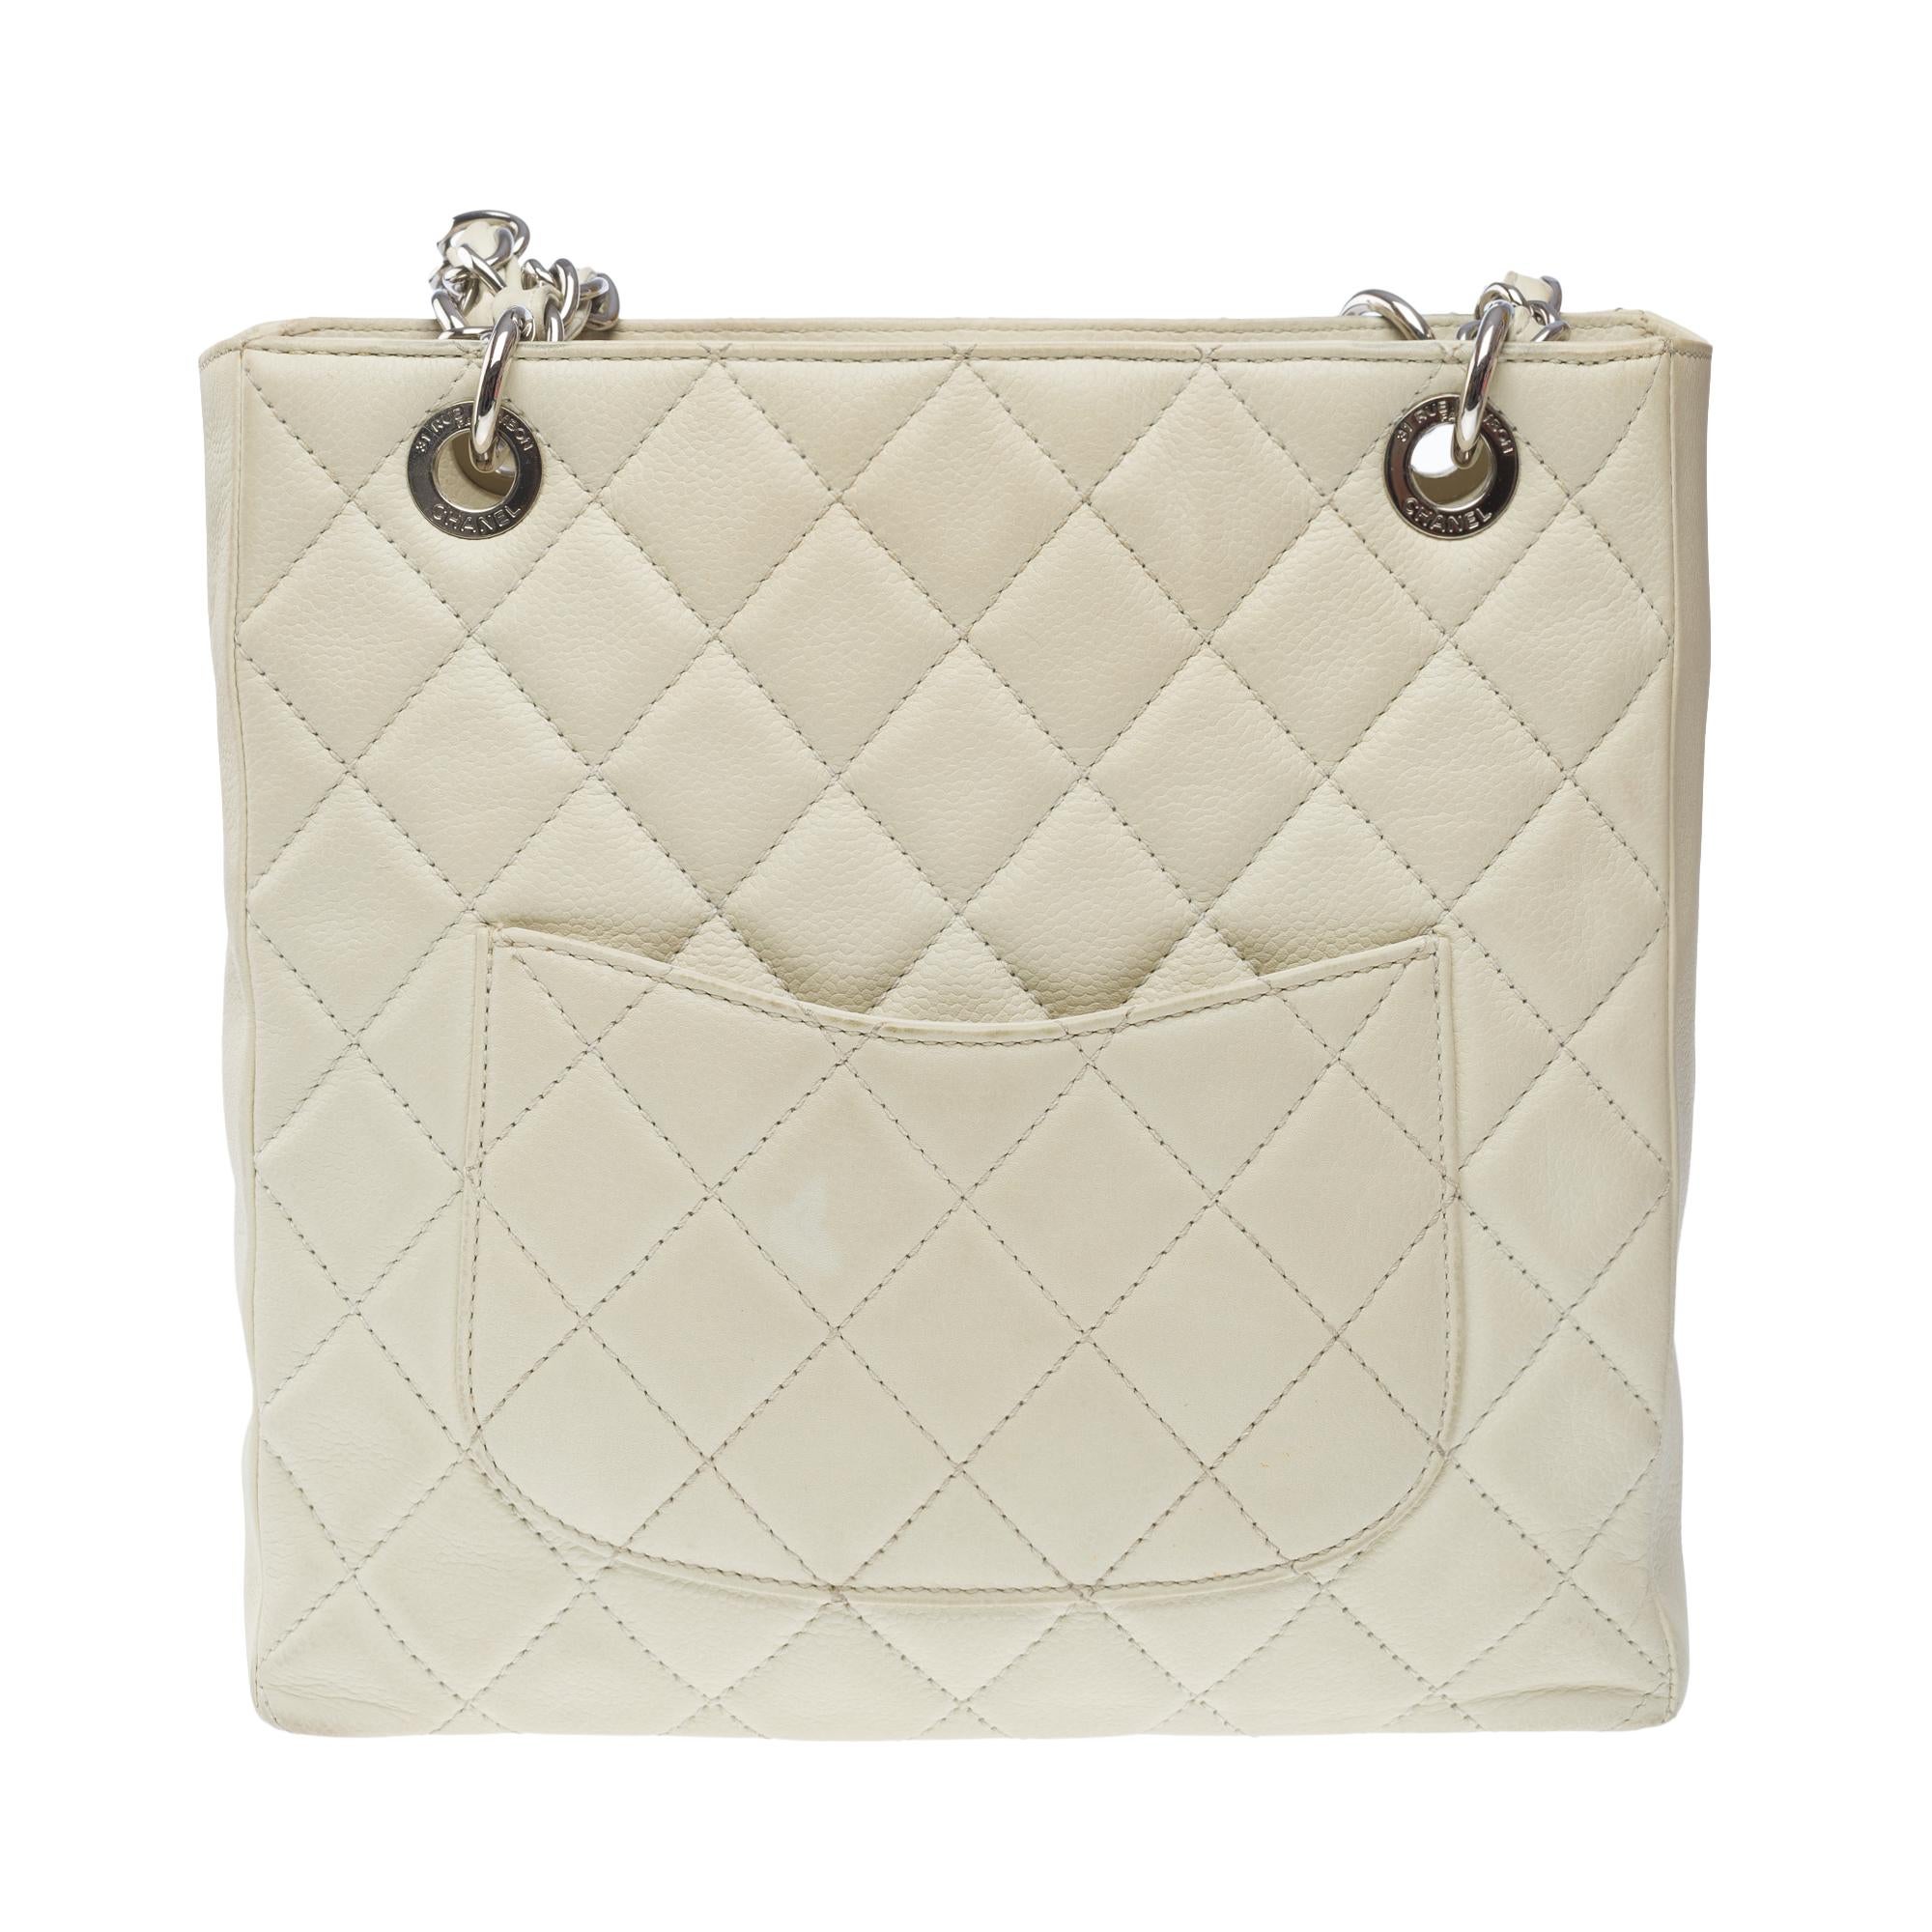 Women's  Chanel Petit Shopping Tote bag (PST) in Off-White Caviar quilted leather, SHW For Sale